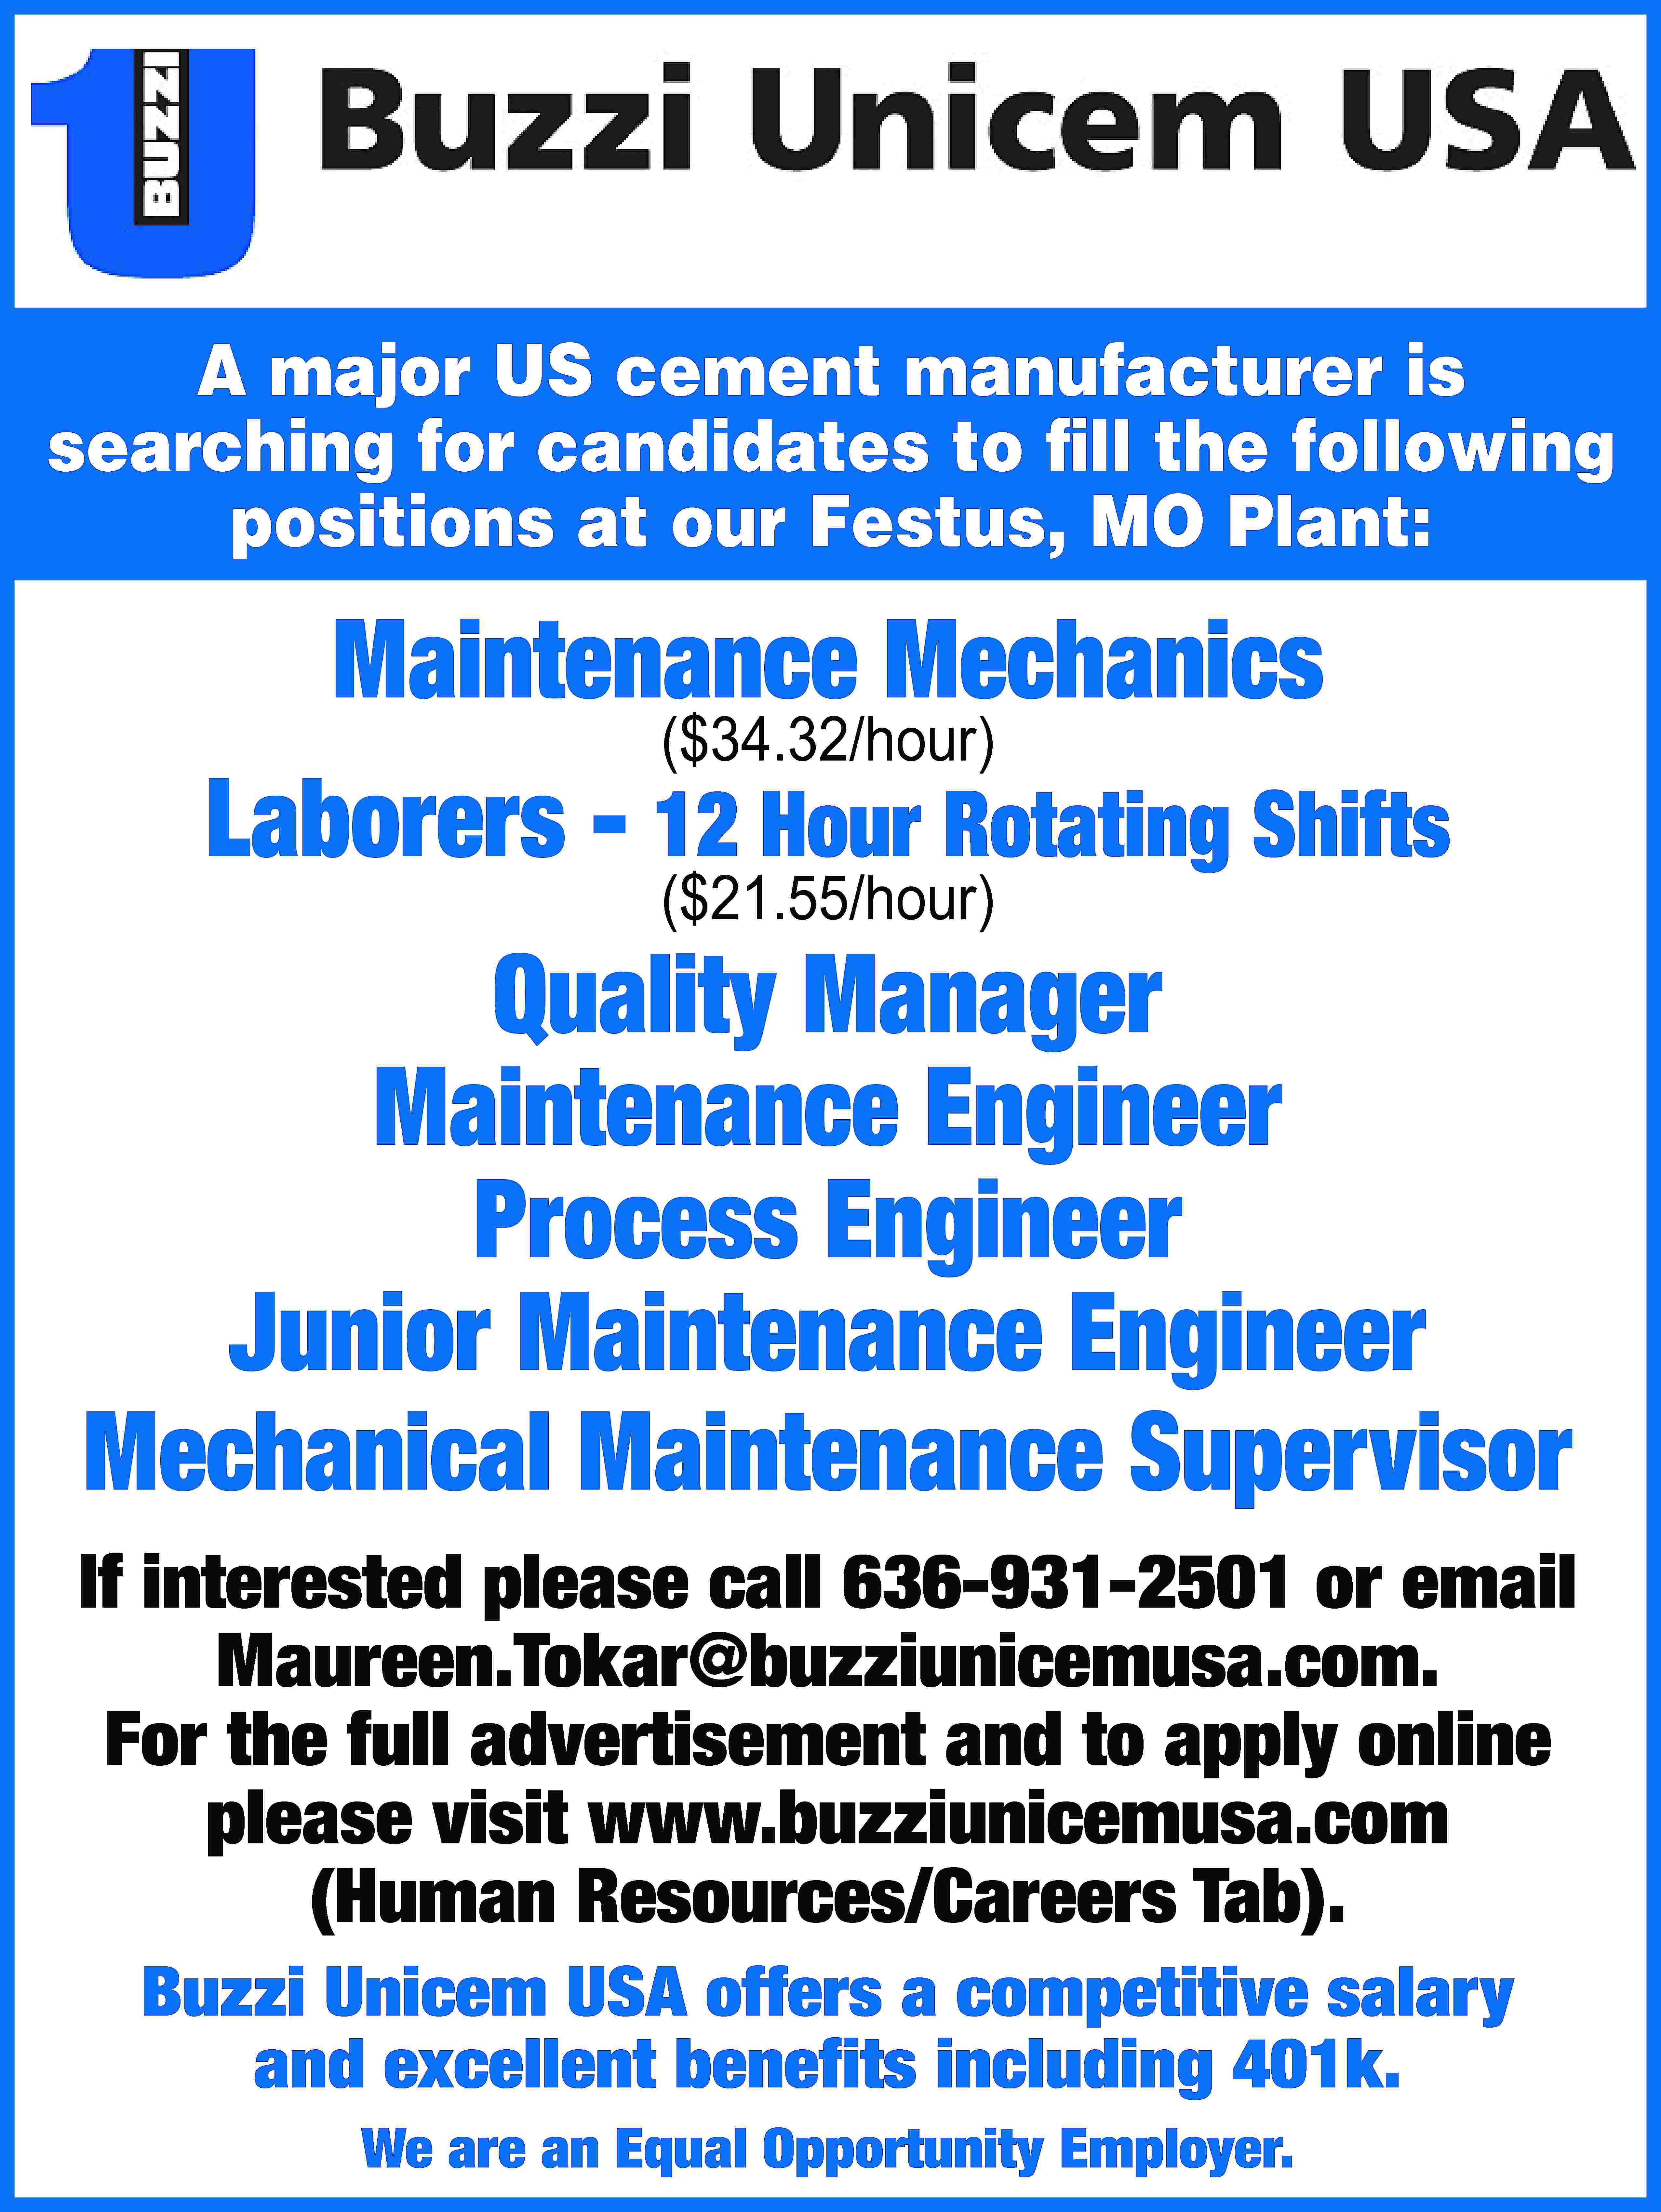 A major US cement manufacturer  A major US cement manufacturer is searching for candidates to fill the following positions at our Festus, MO Plant: Maintenance Mechanics ($34.32/hour) Laborers - 12 Hour Rotating Shifts ($21.55/hour) Quality Manager Maintenance Engineer Process Engineer Junior Maintenance Engineer Mechanical Maintenance Supervisor If interested please call 636-931-2501 or email Maureen.Tokar@buzziunicemusa.com. For the full advertisement and to apply online please visit www.buzziunicemusa.com (Human Resources/Careers Tab). Buzzi Unicem USA offers a competitive salary and excellent benefits including 401k. We are an Equal Opportunity Employer.